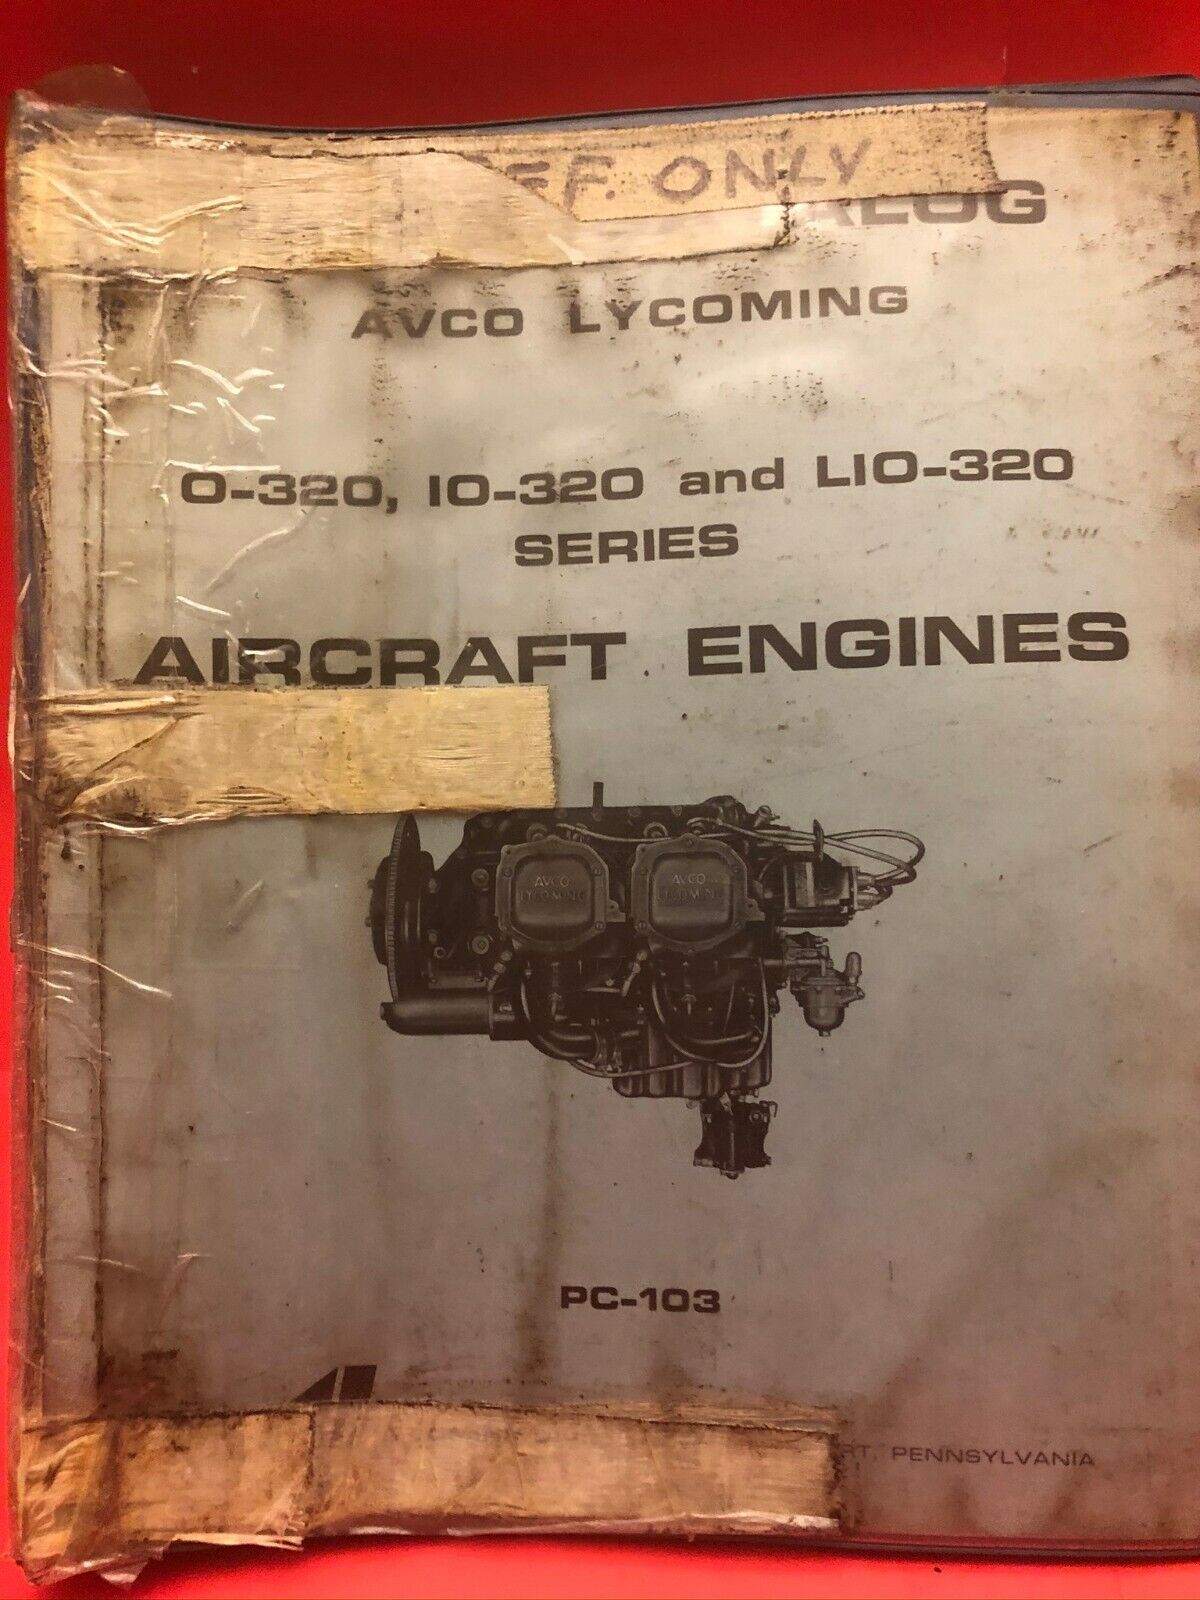 1970 AVCO Lycoming Parts Catalog PC-103 0-320 10-320 L10-320 Series  